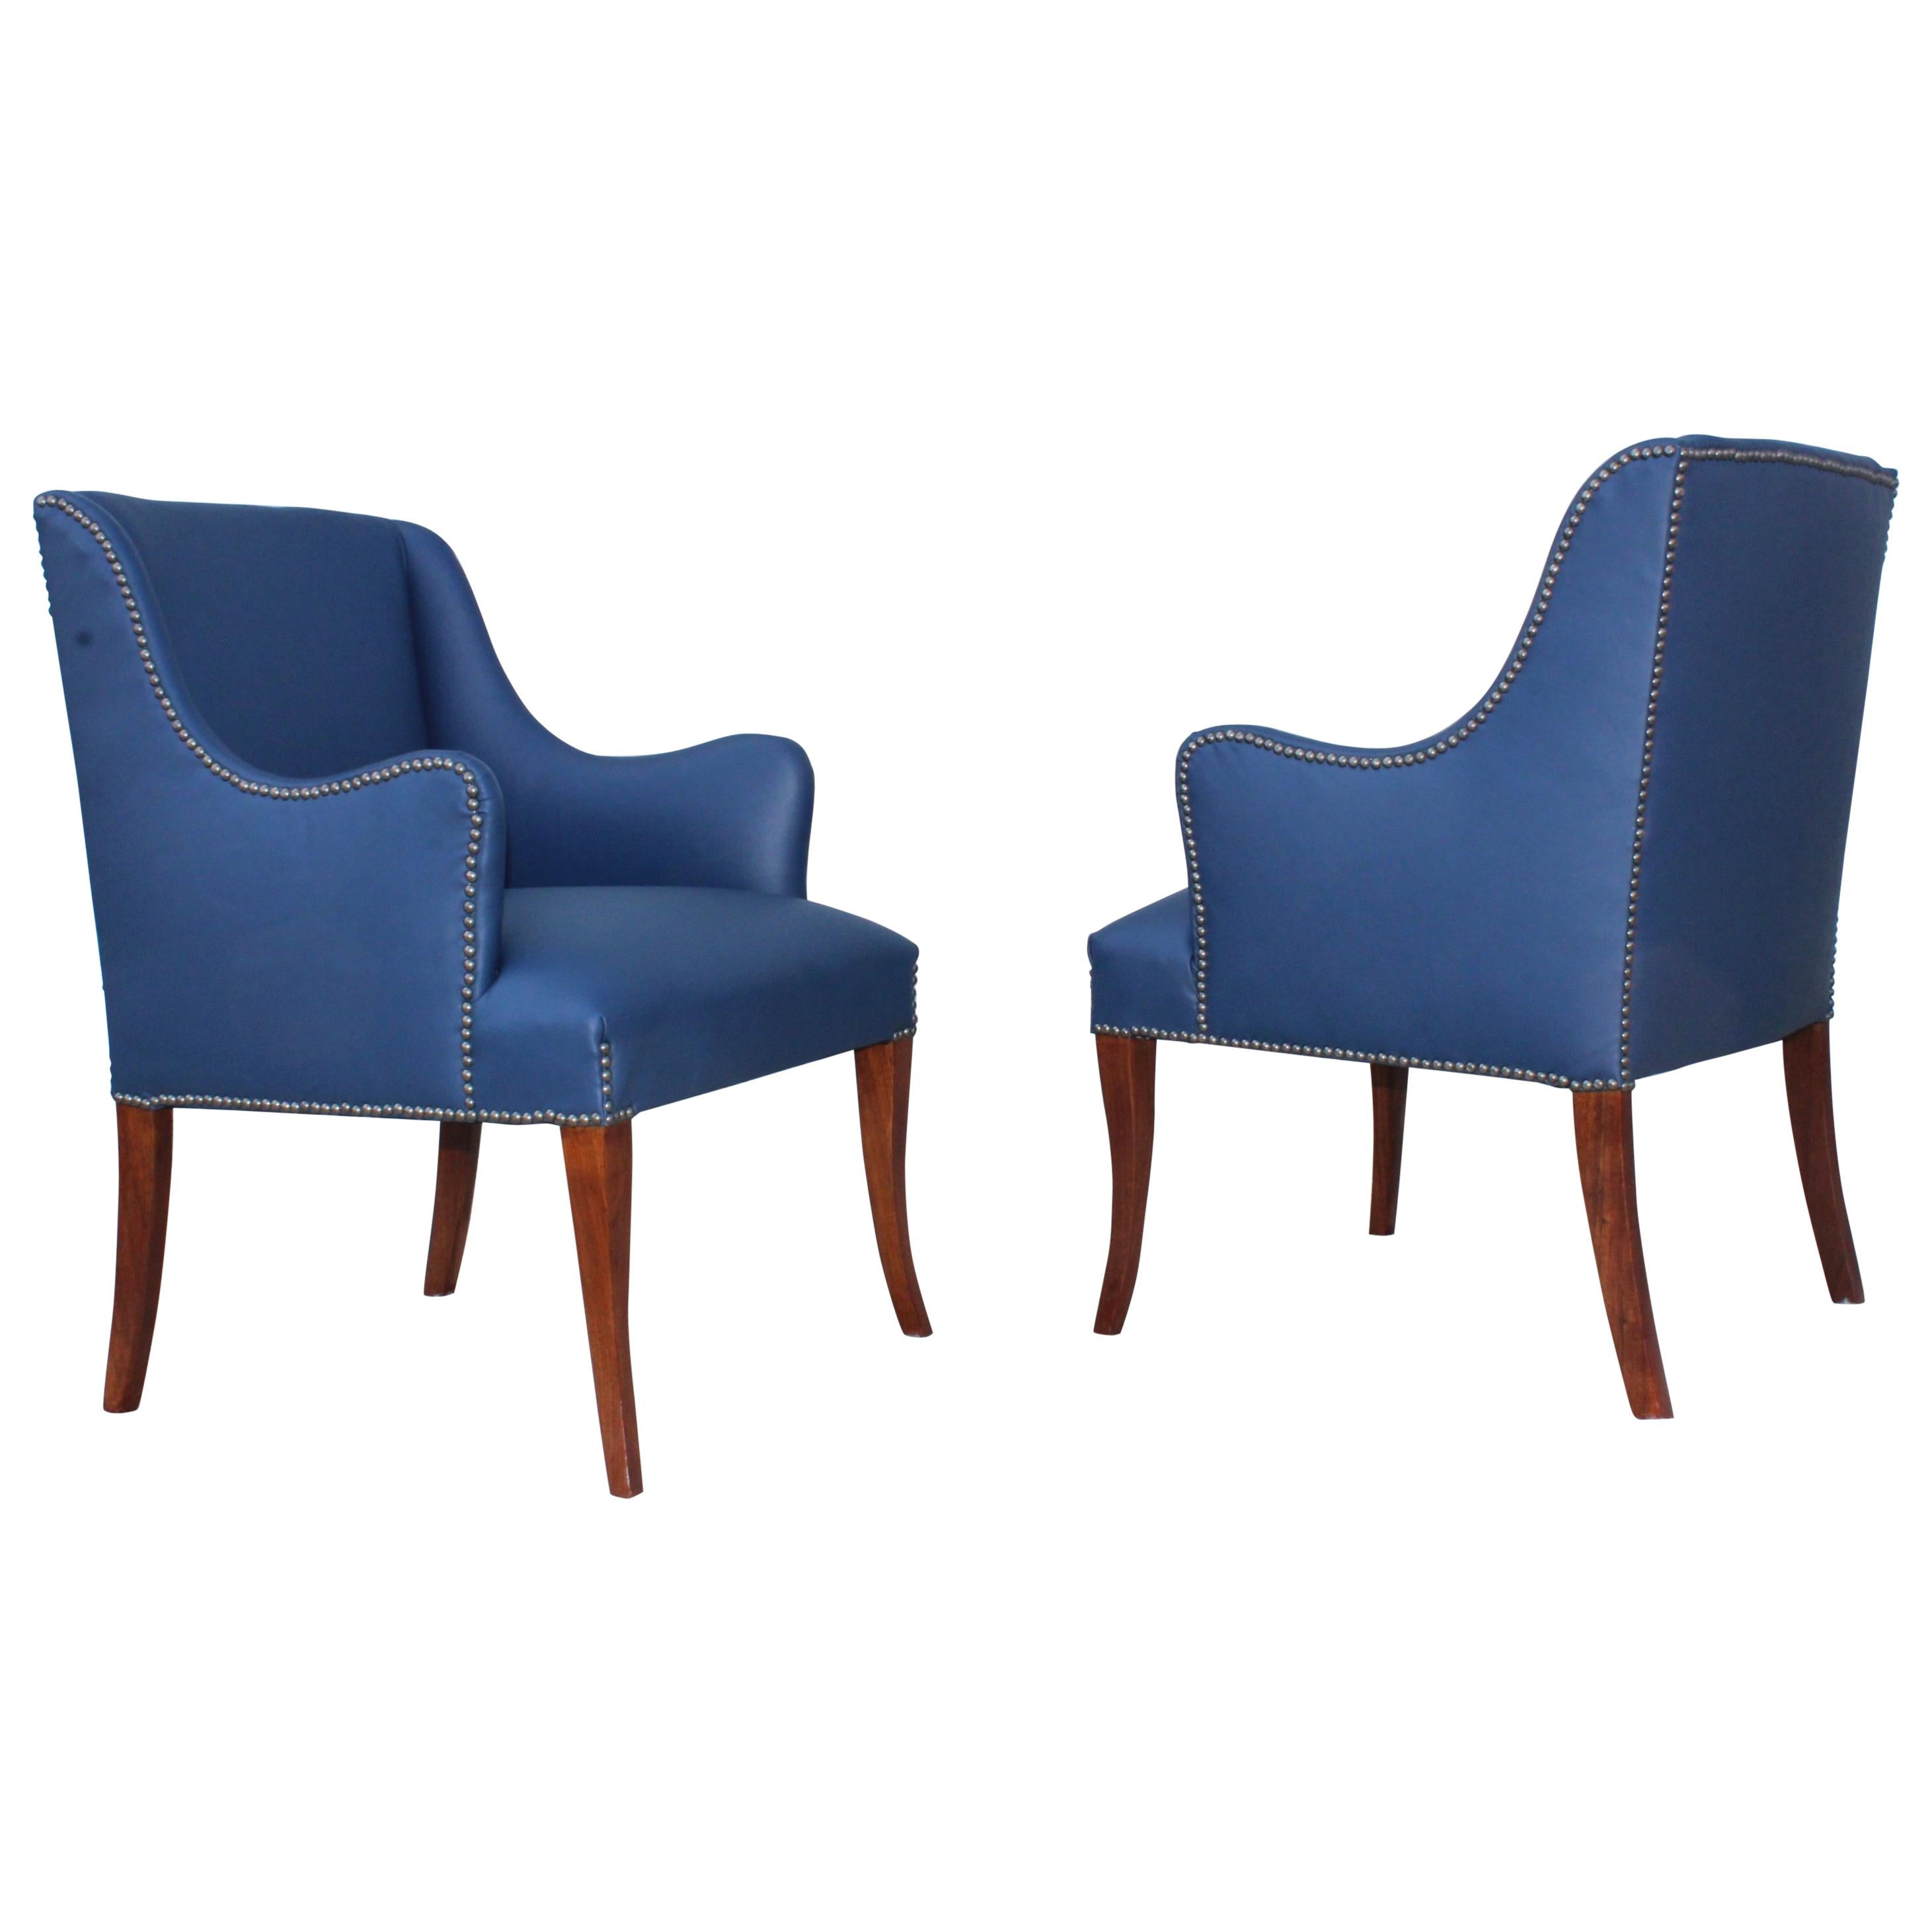 1960s Blue Leather Lounge Chairs